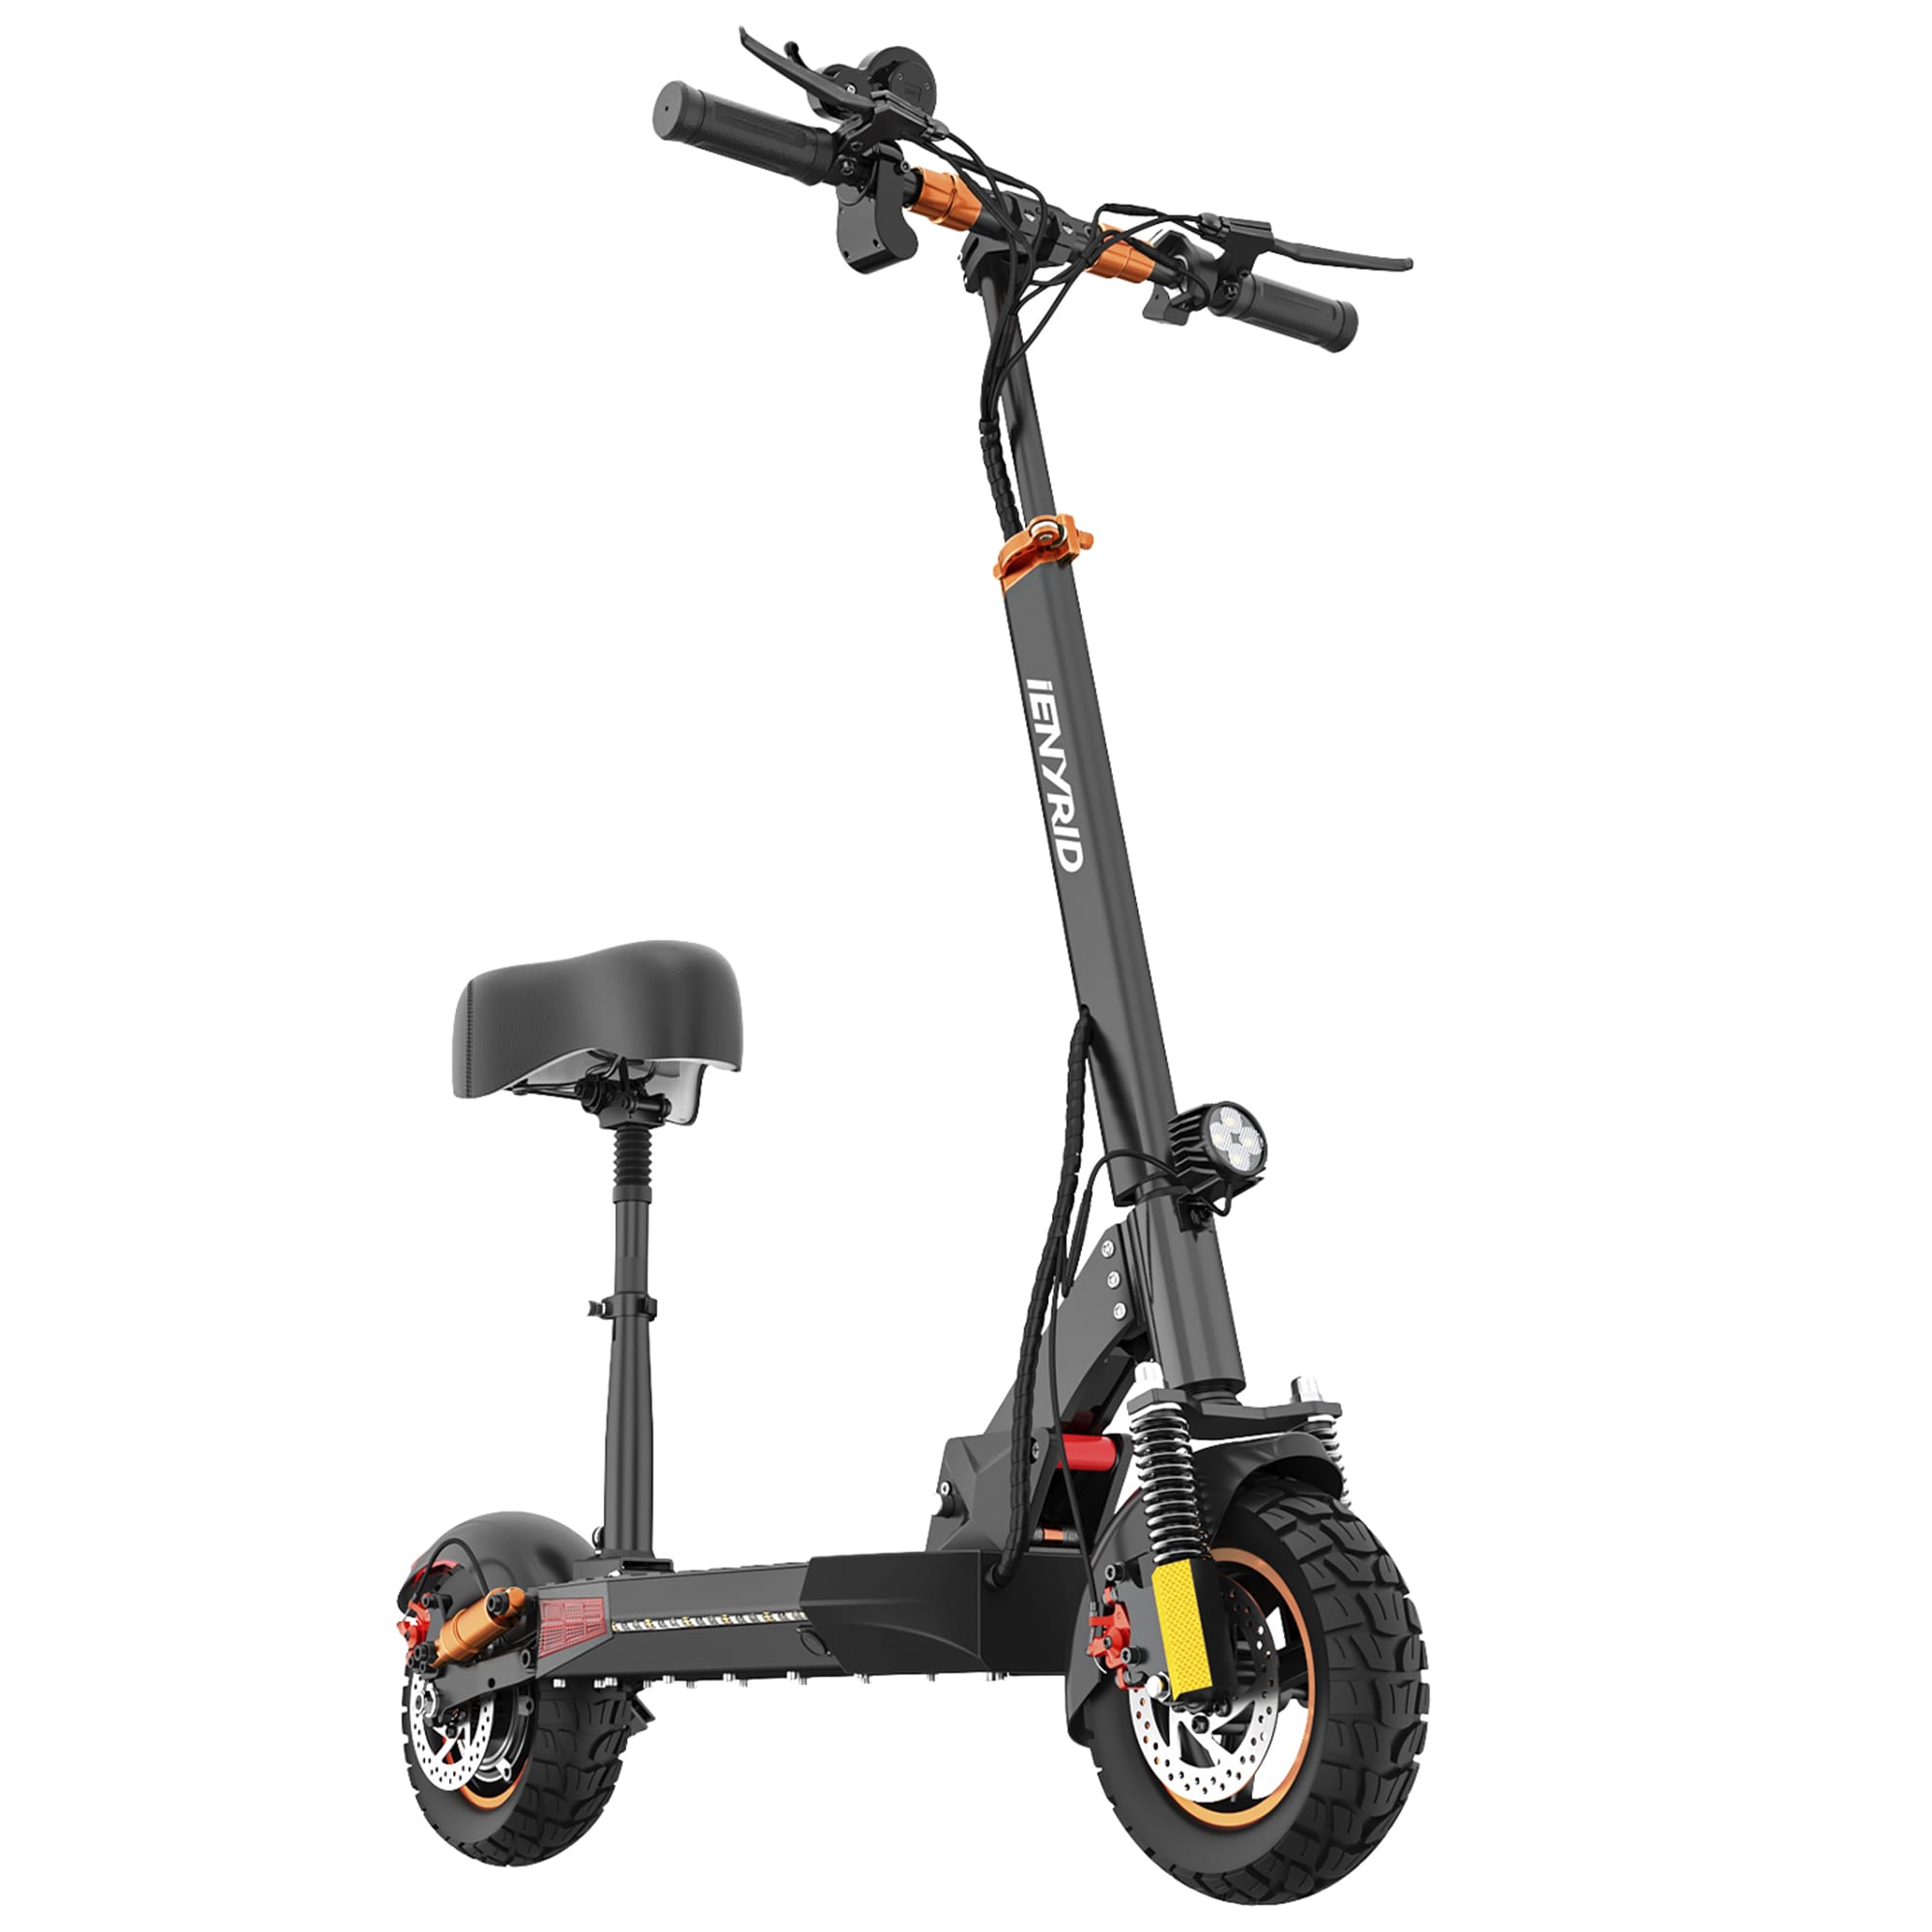 Bergbeklimmer duisternis kan niet zien Wildaven Electric Scooter,M4 Pro 10 inch Off-road Pneumatic Tires,Commuting  Scooter for Adults with 48V/10AH Lighium Battery in the Scooters department  at Lowes.com